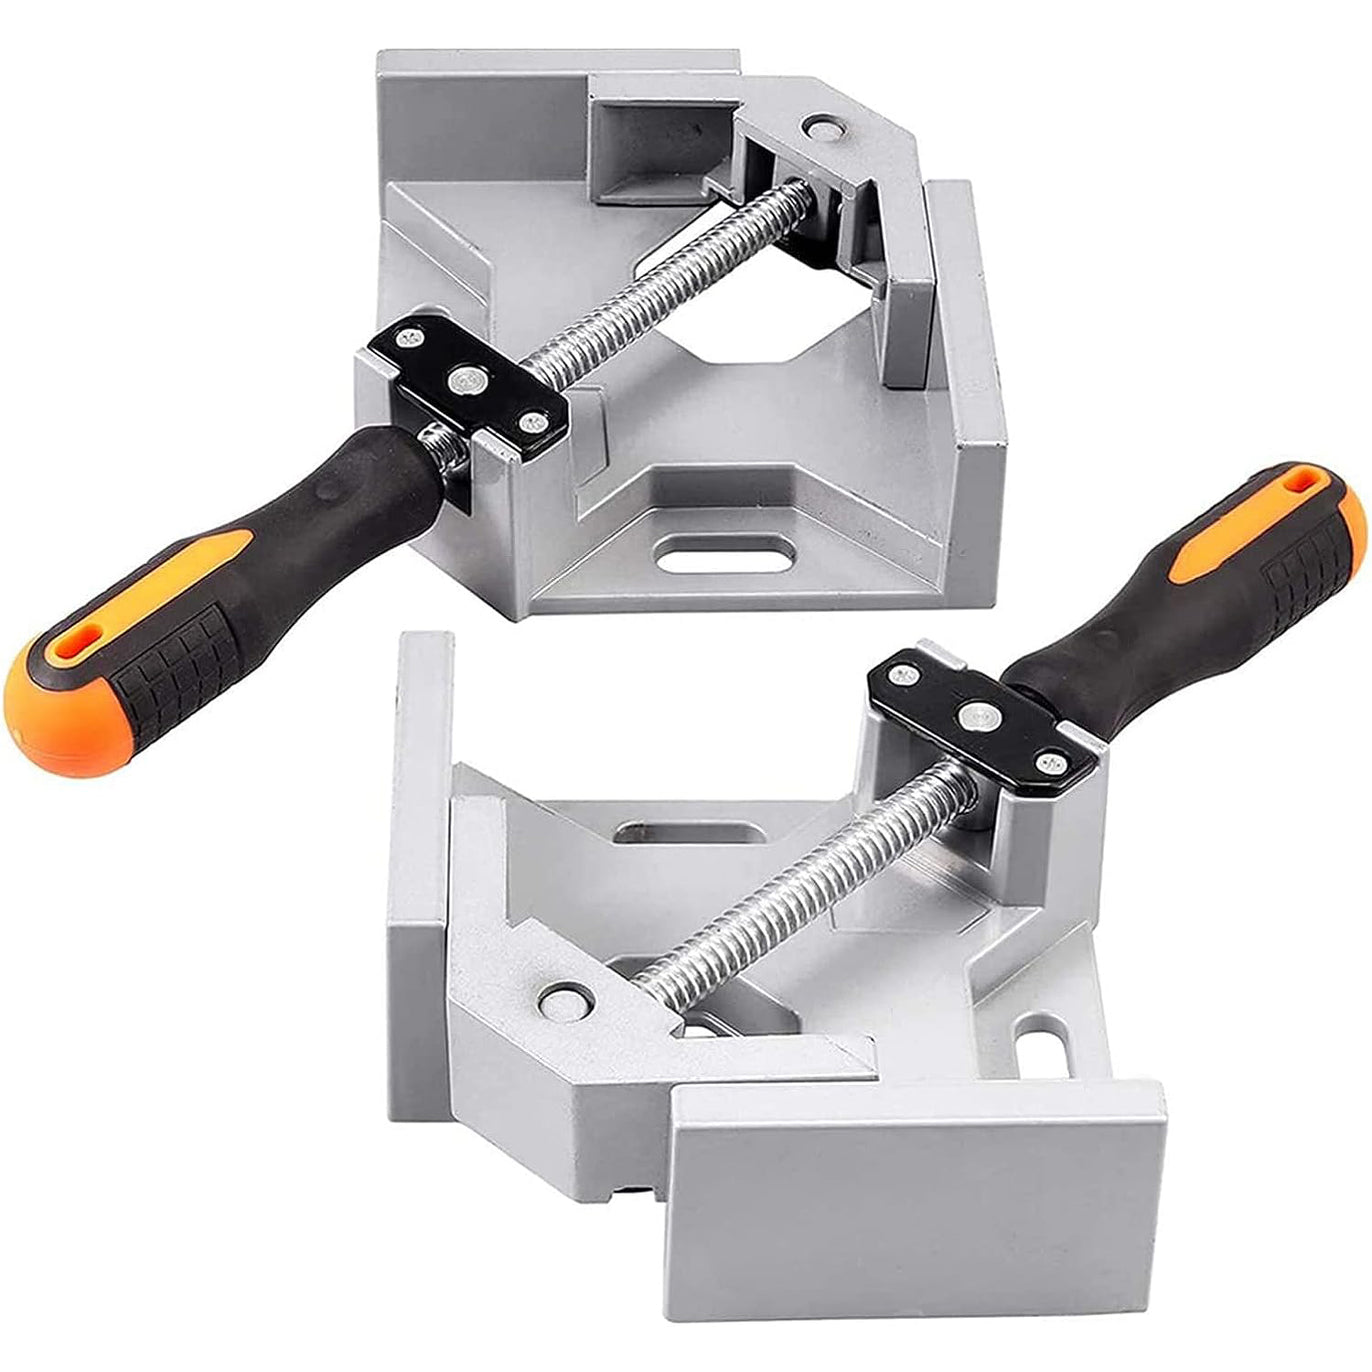 eSynic 2Pcs 90 Degree Right Corner Clamp Holder Heavy Duty Wood Angle Welding Clamps